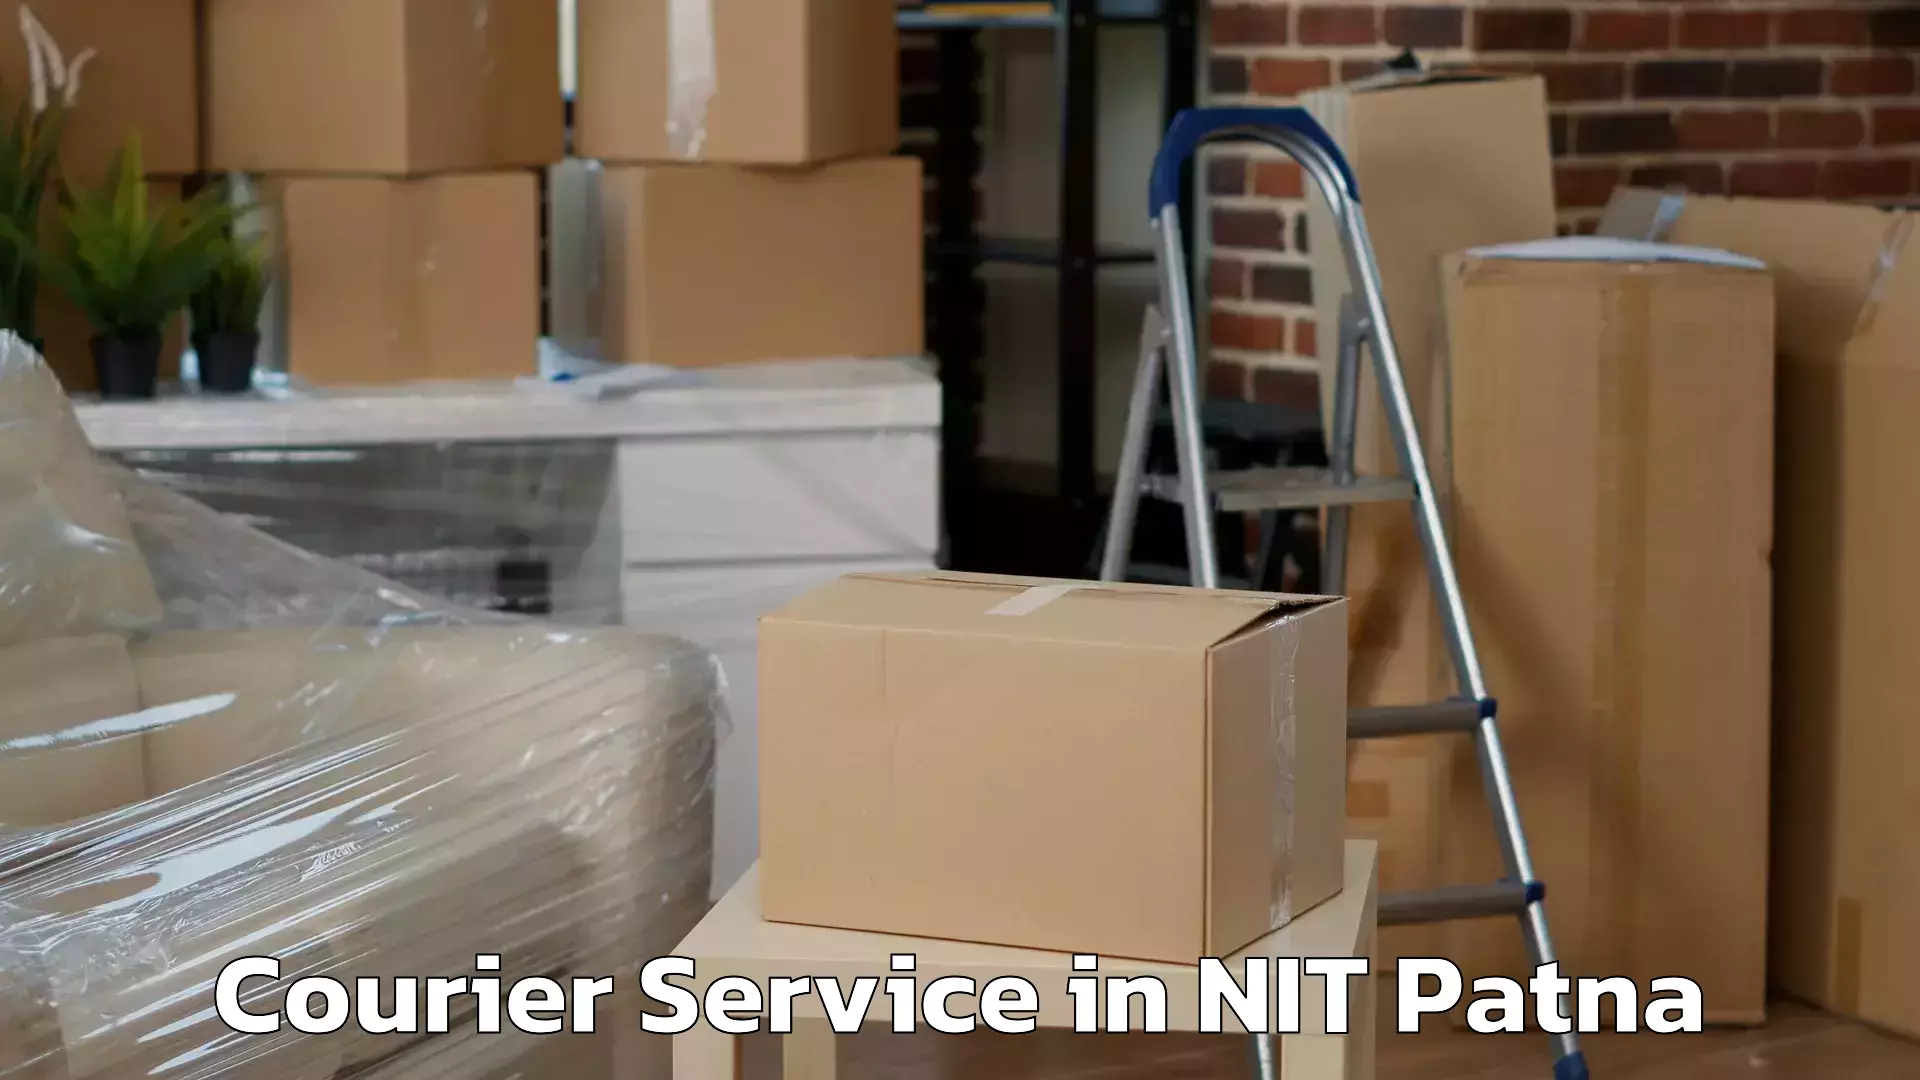 Customer-focused courier in NIT Patna